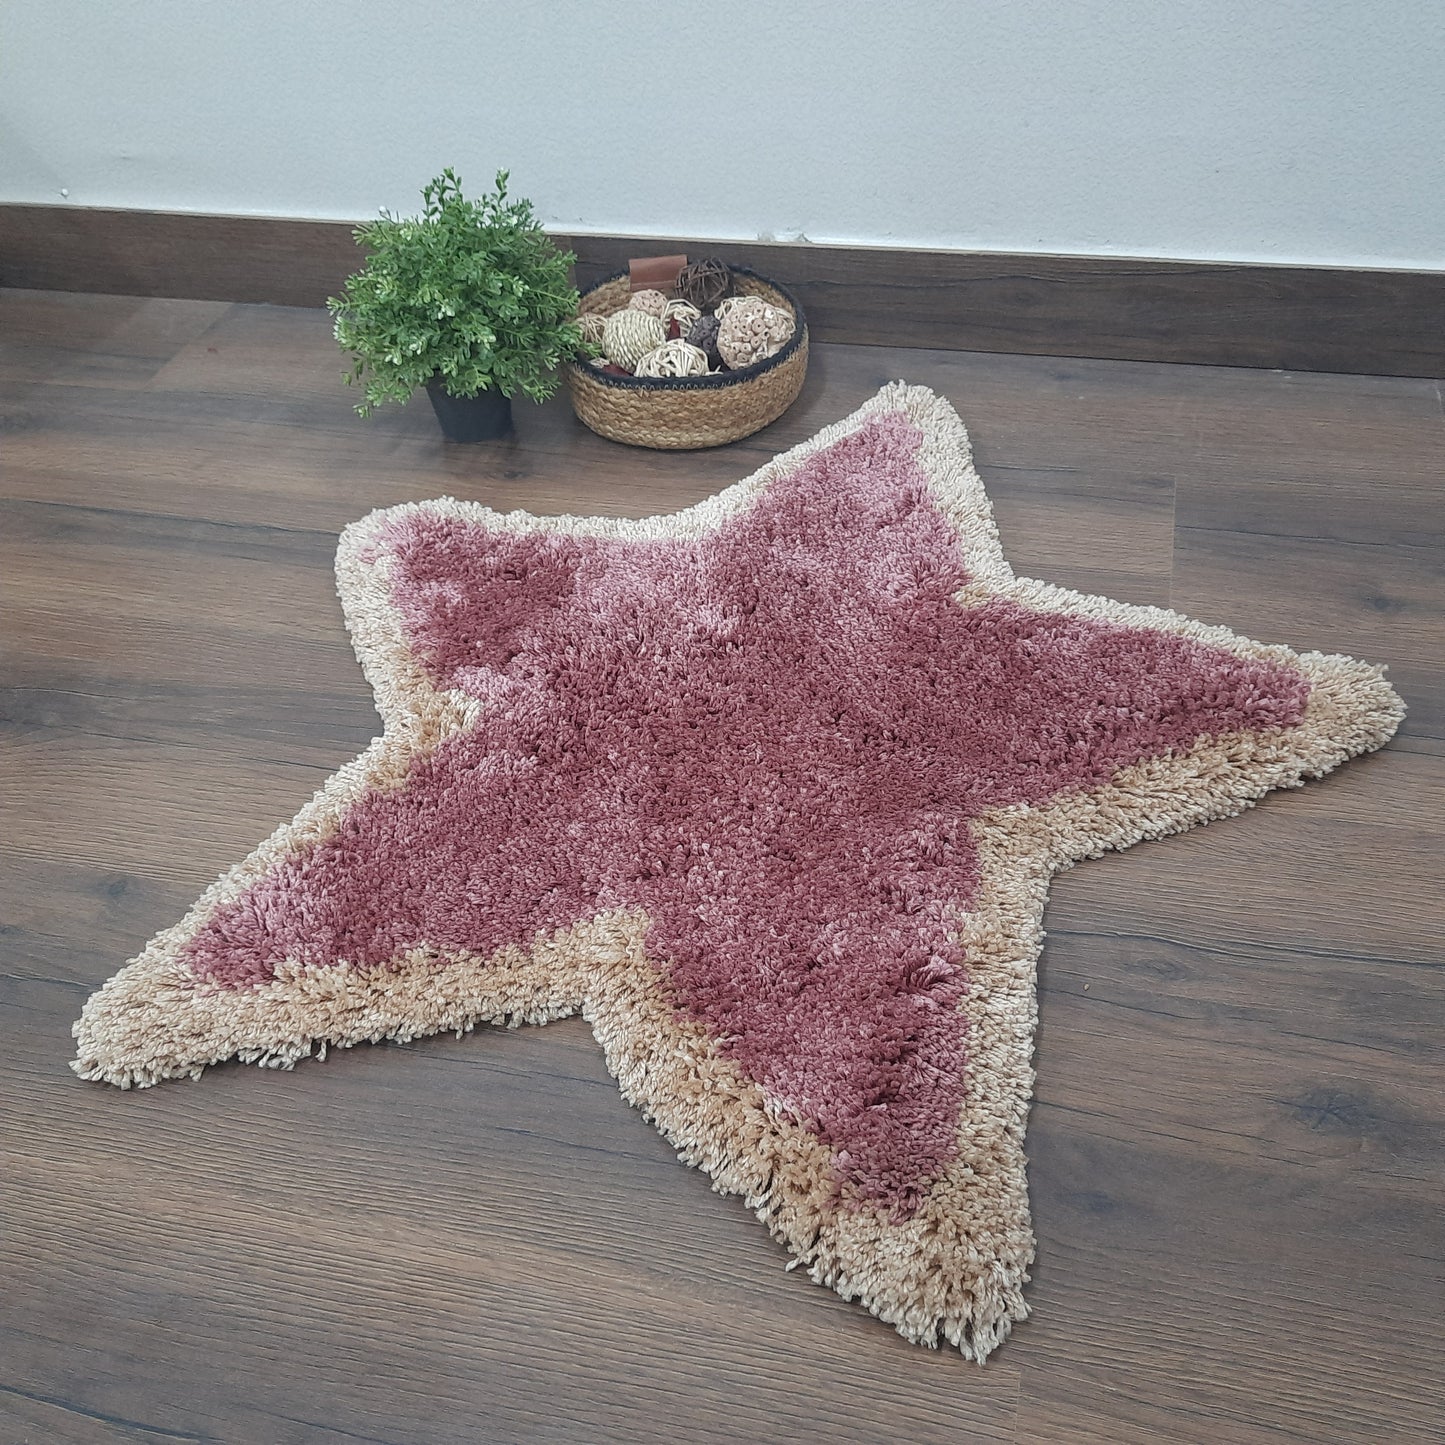 Shaggy Kids Carpet | Washable | Hand Woven Star Shape Super Luxurious Feel | Export Quality-Berry Blush And Beige-75X75 Cms (2.5×2.5 Feet)